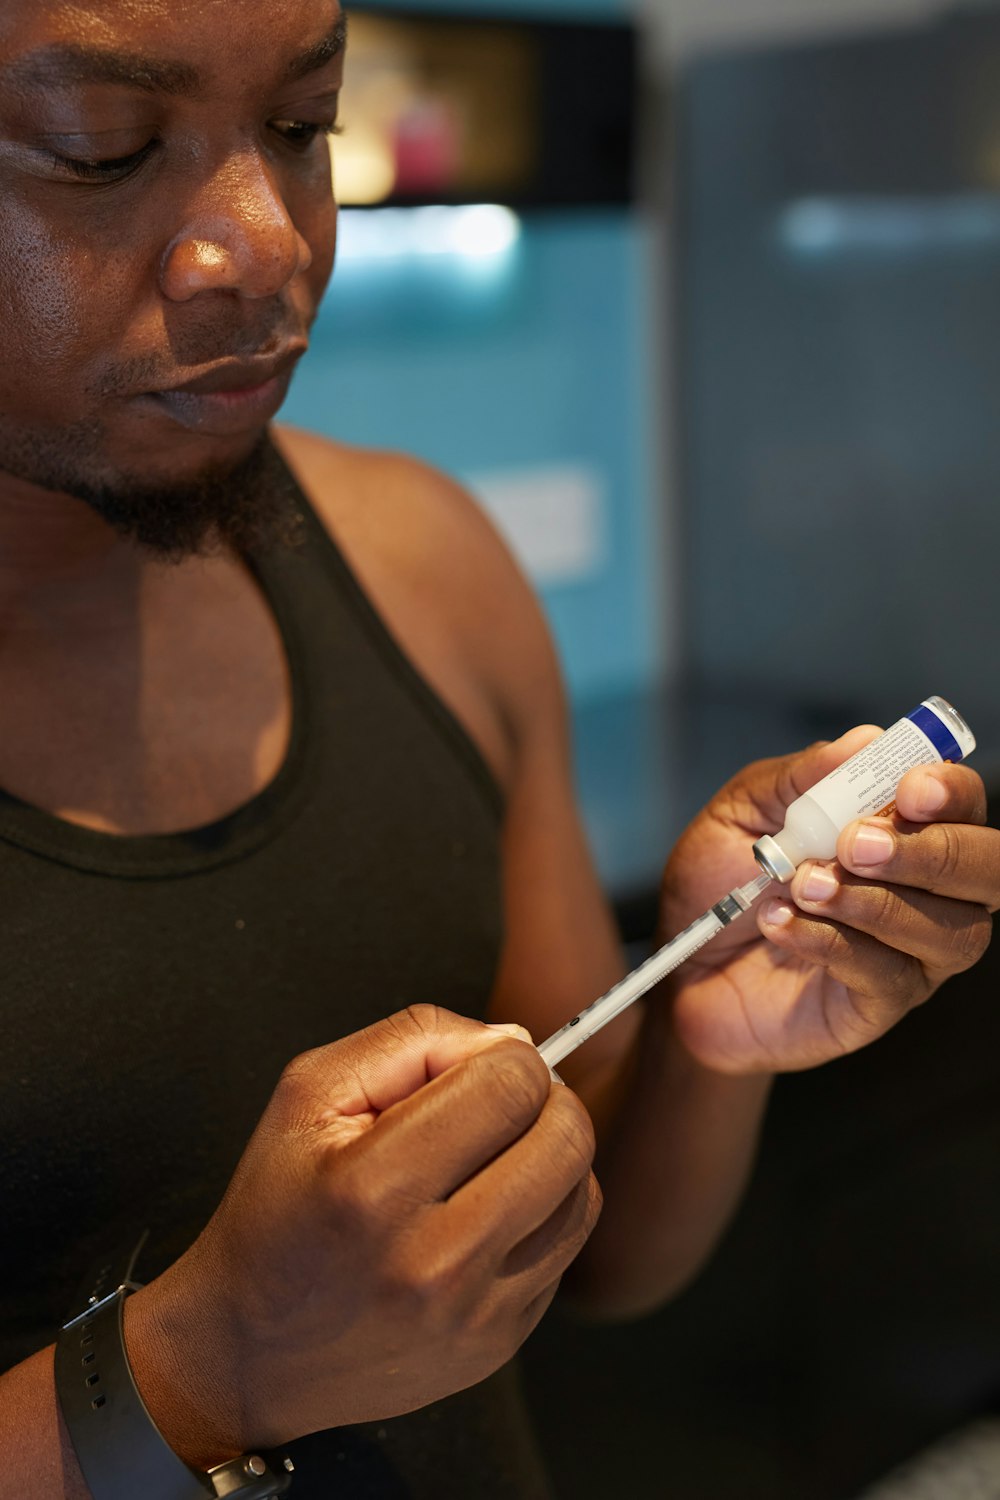 a person holding an insulin injection